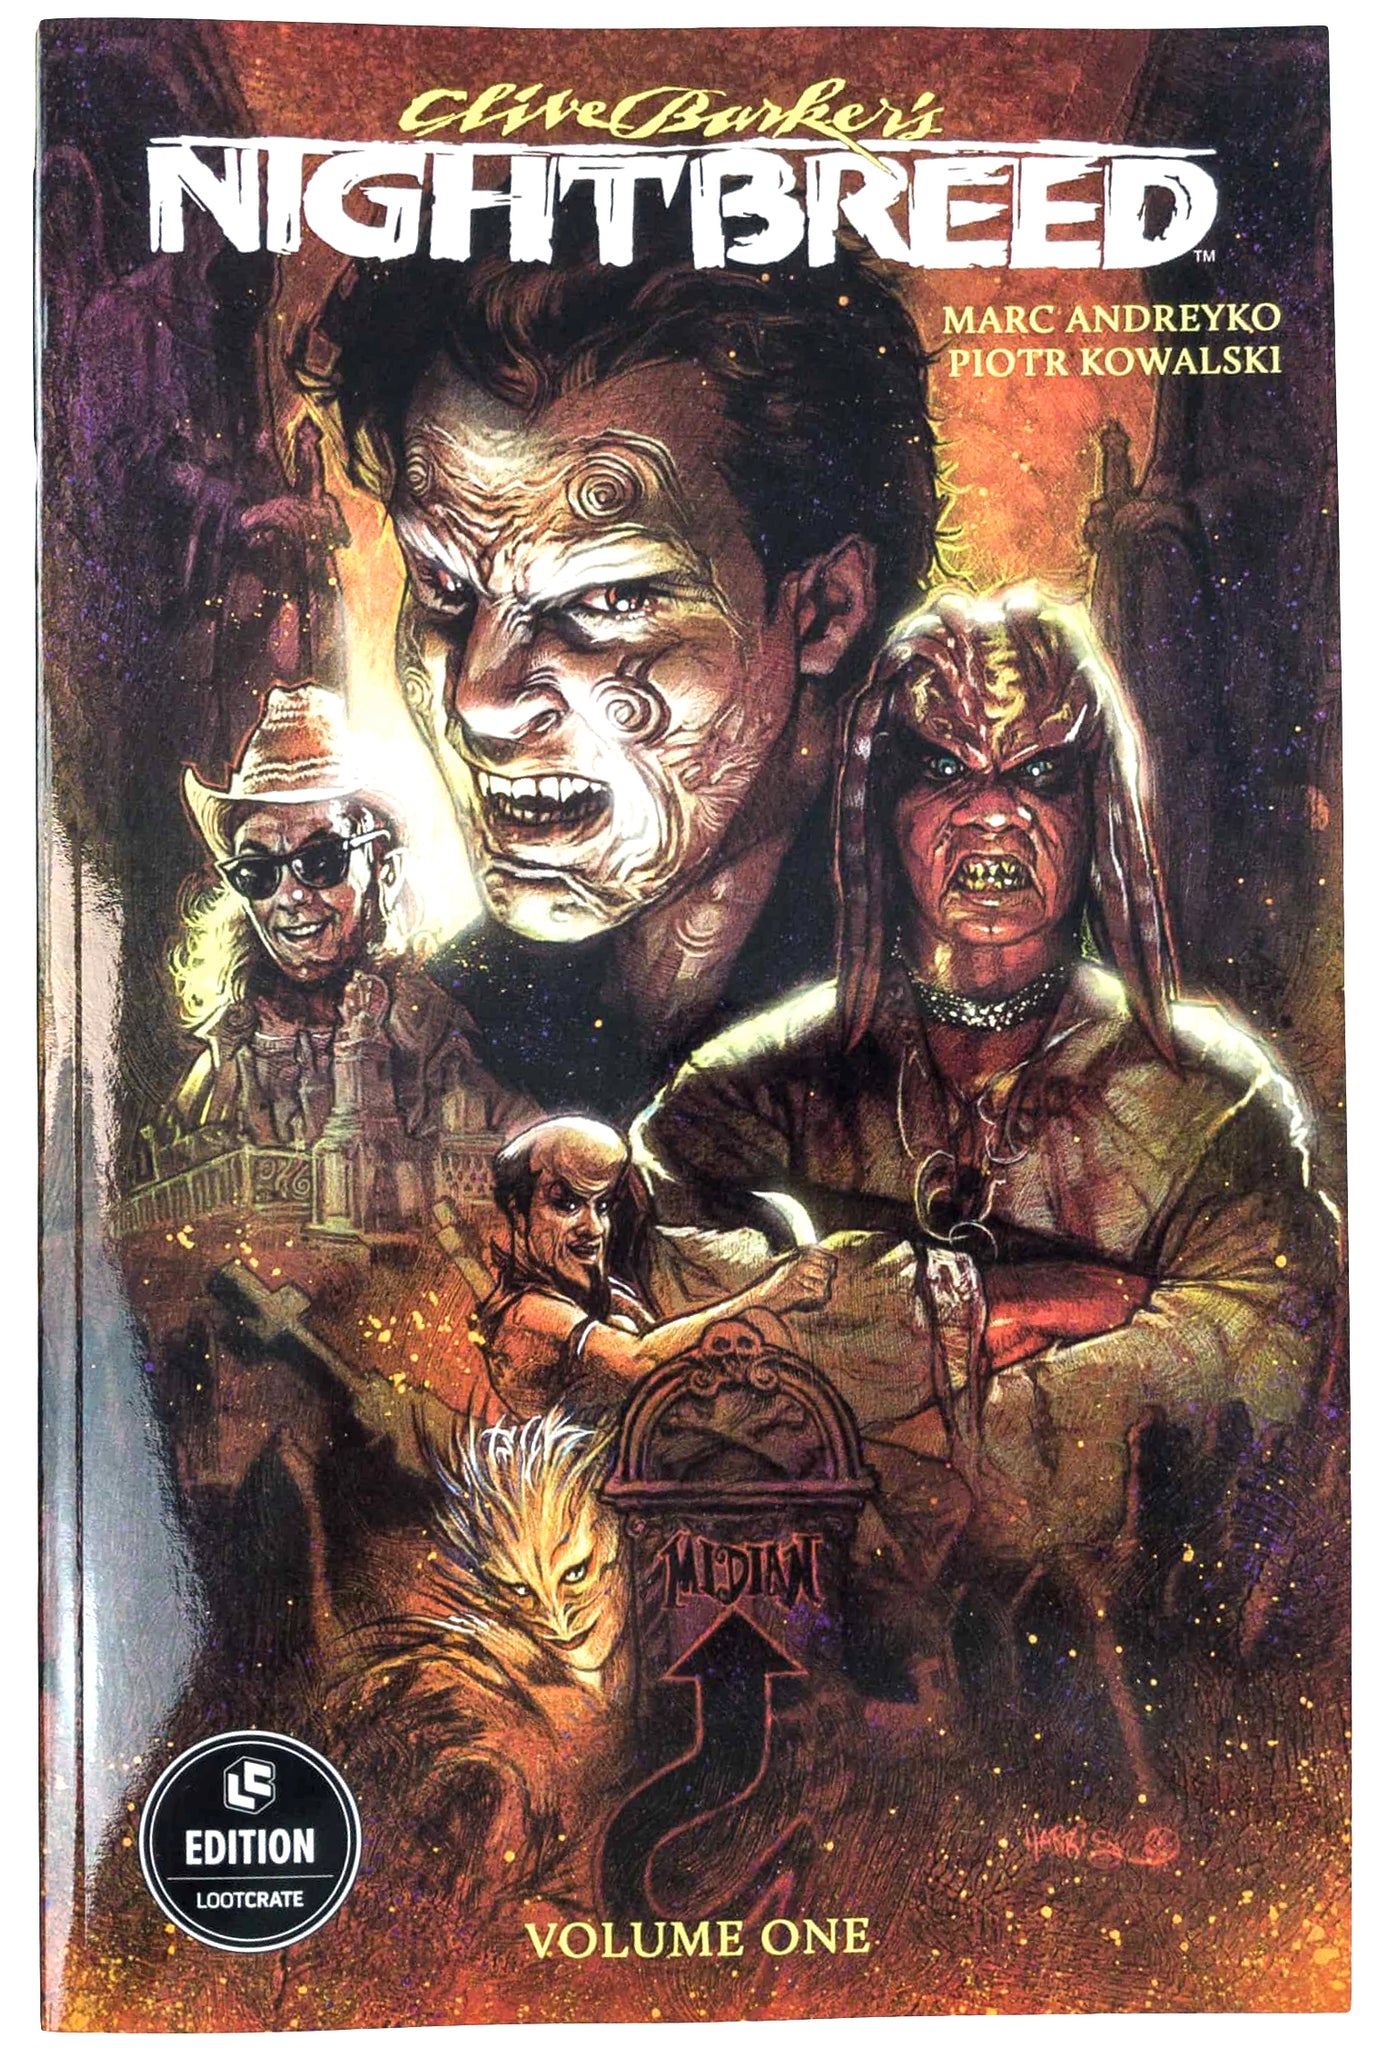 Clive Barker's Nightbreed Vol. 1 Graphic Novel Comic Book